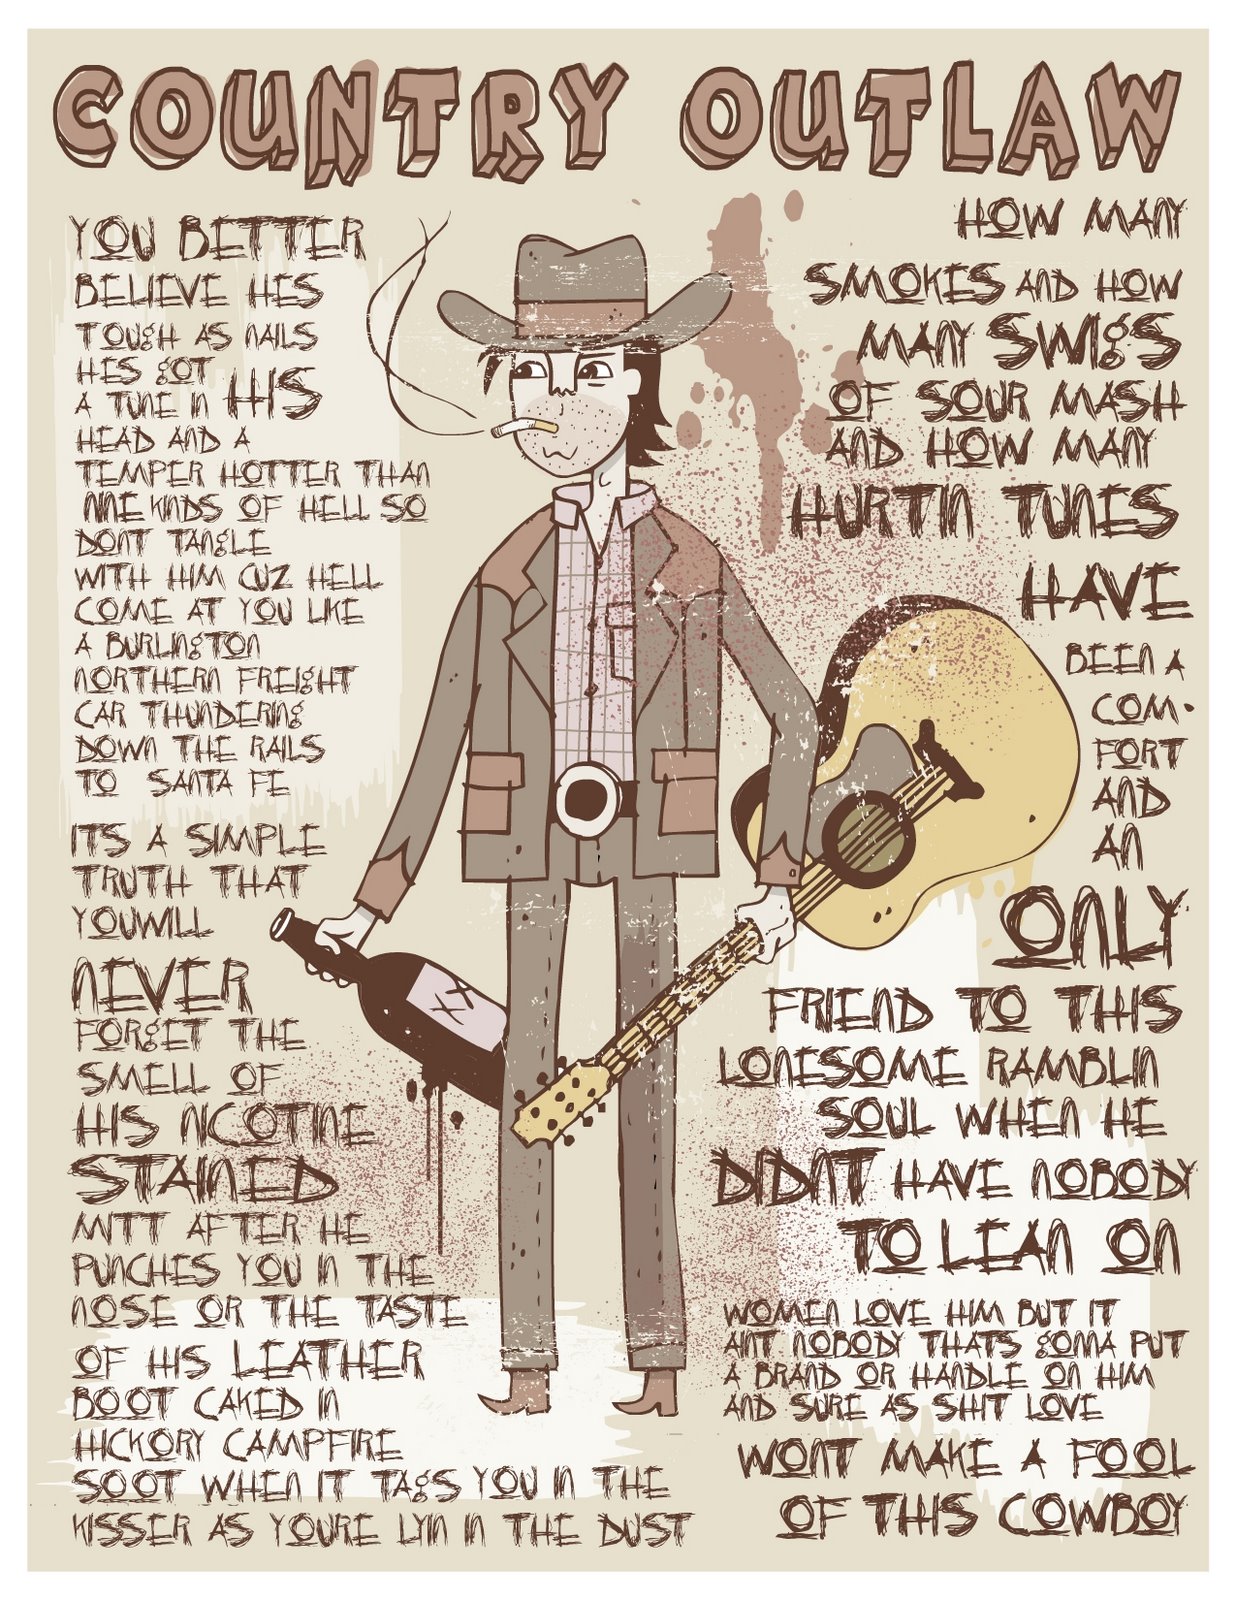 [country++outlaw.jpg]